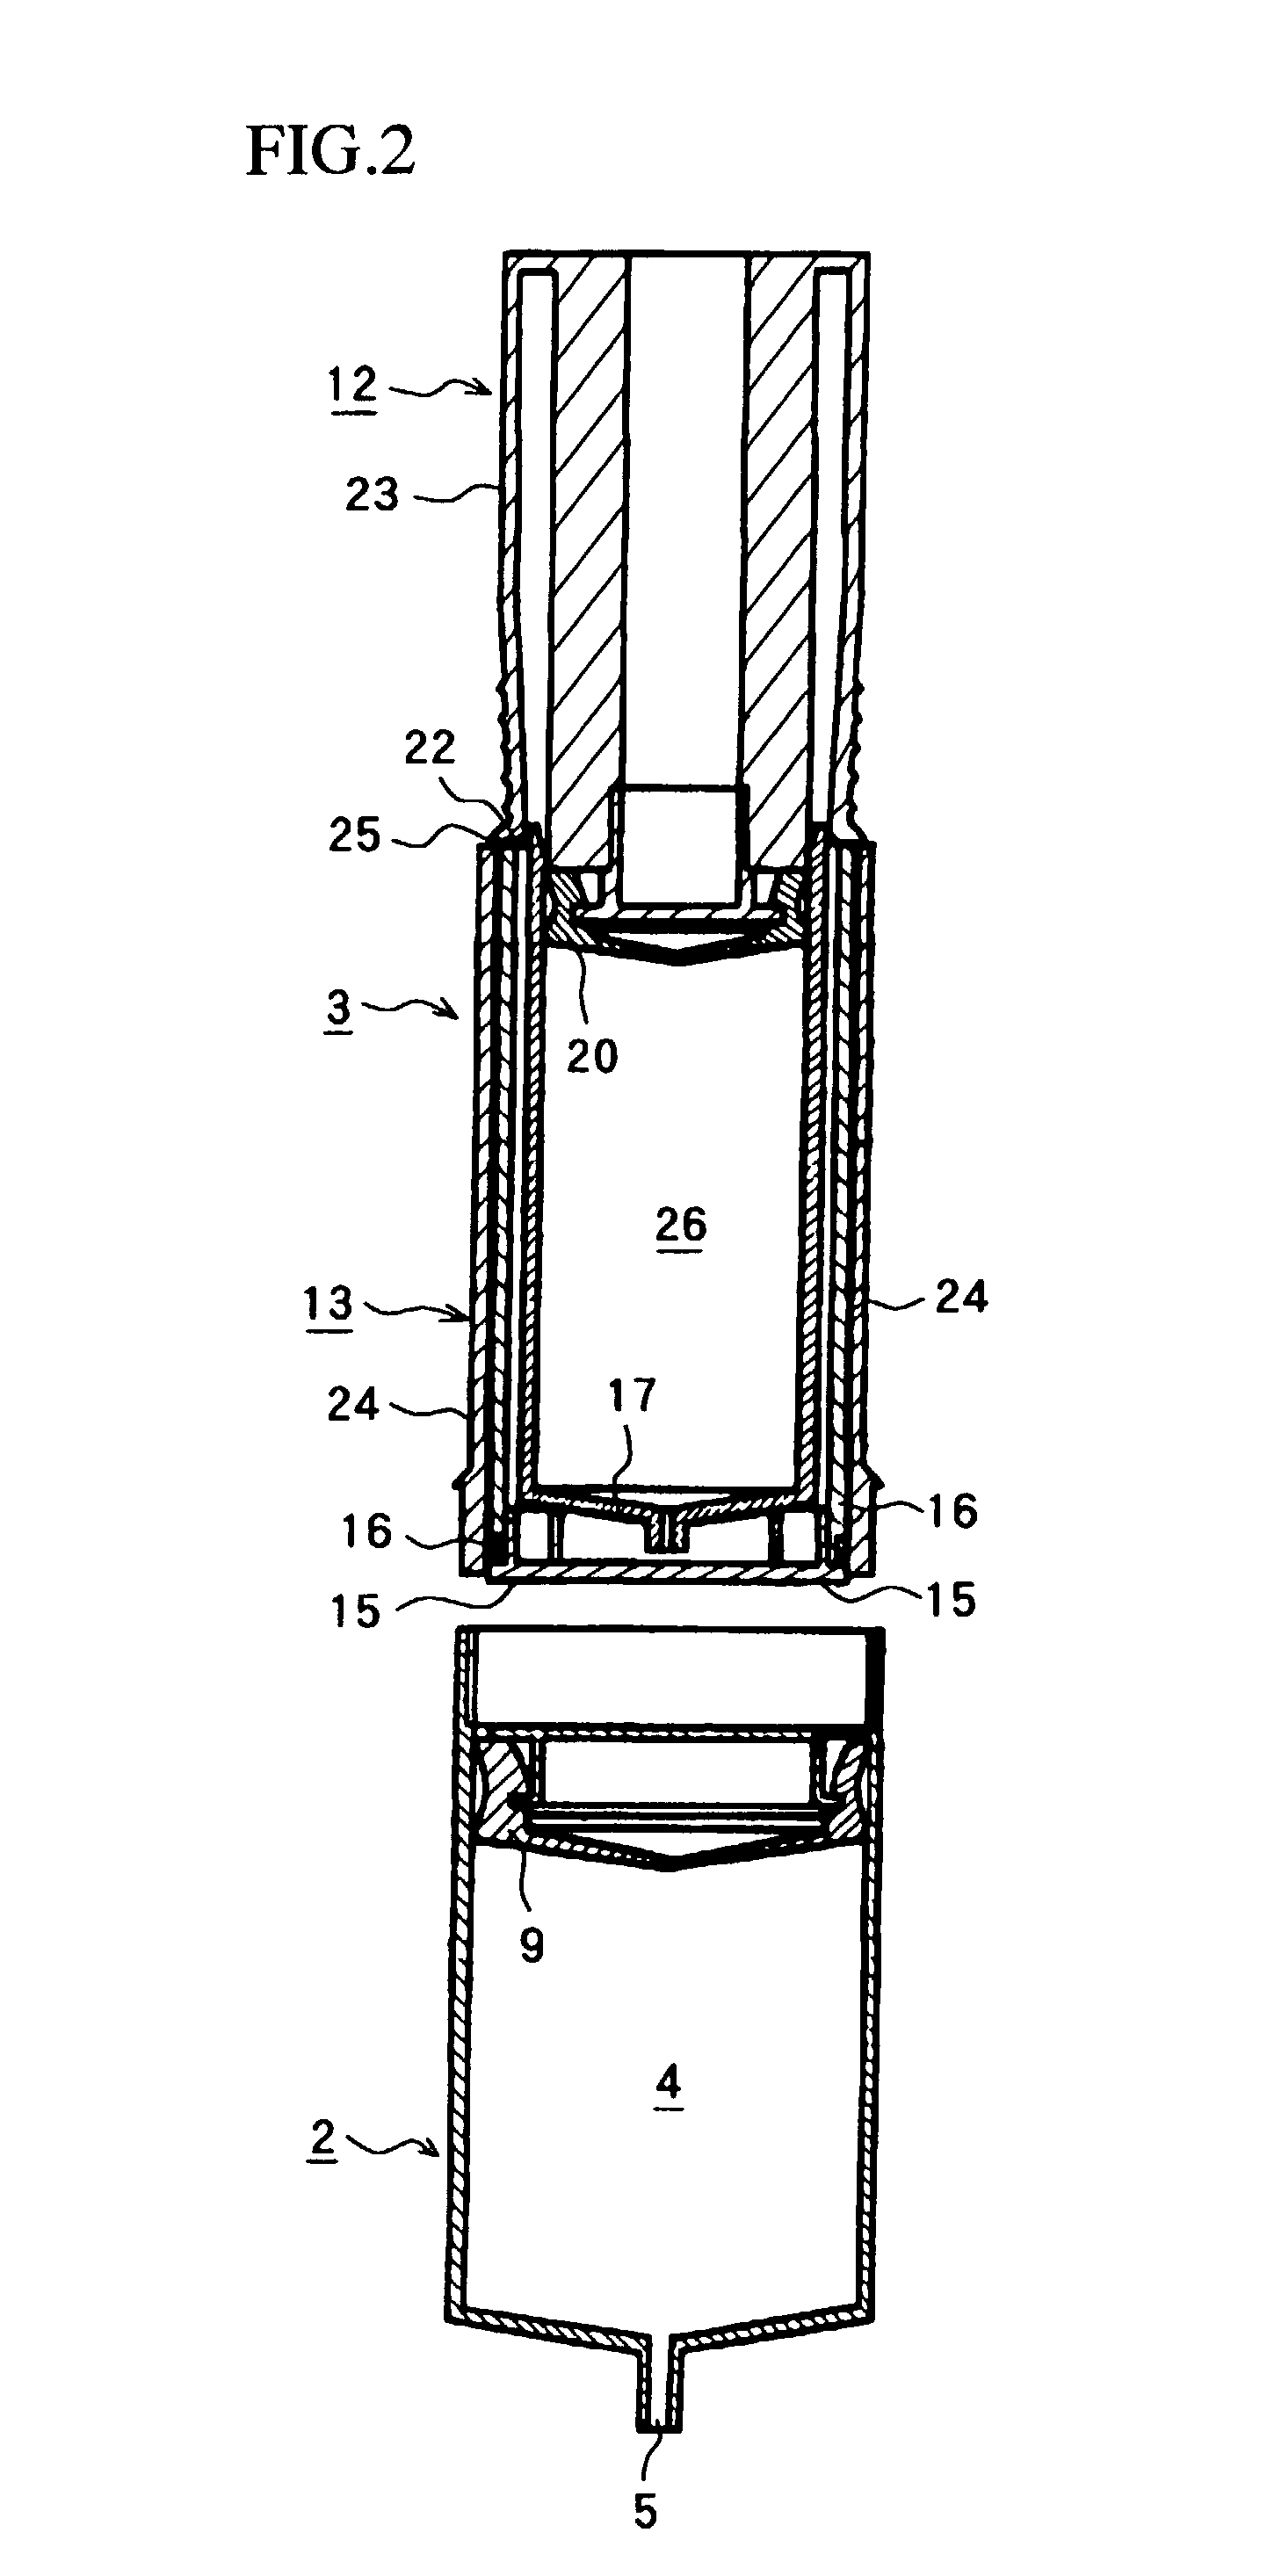 Continuous liquid infusion device